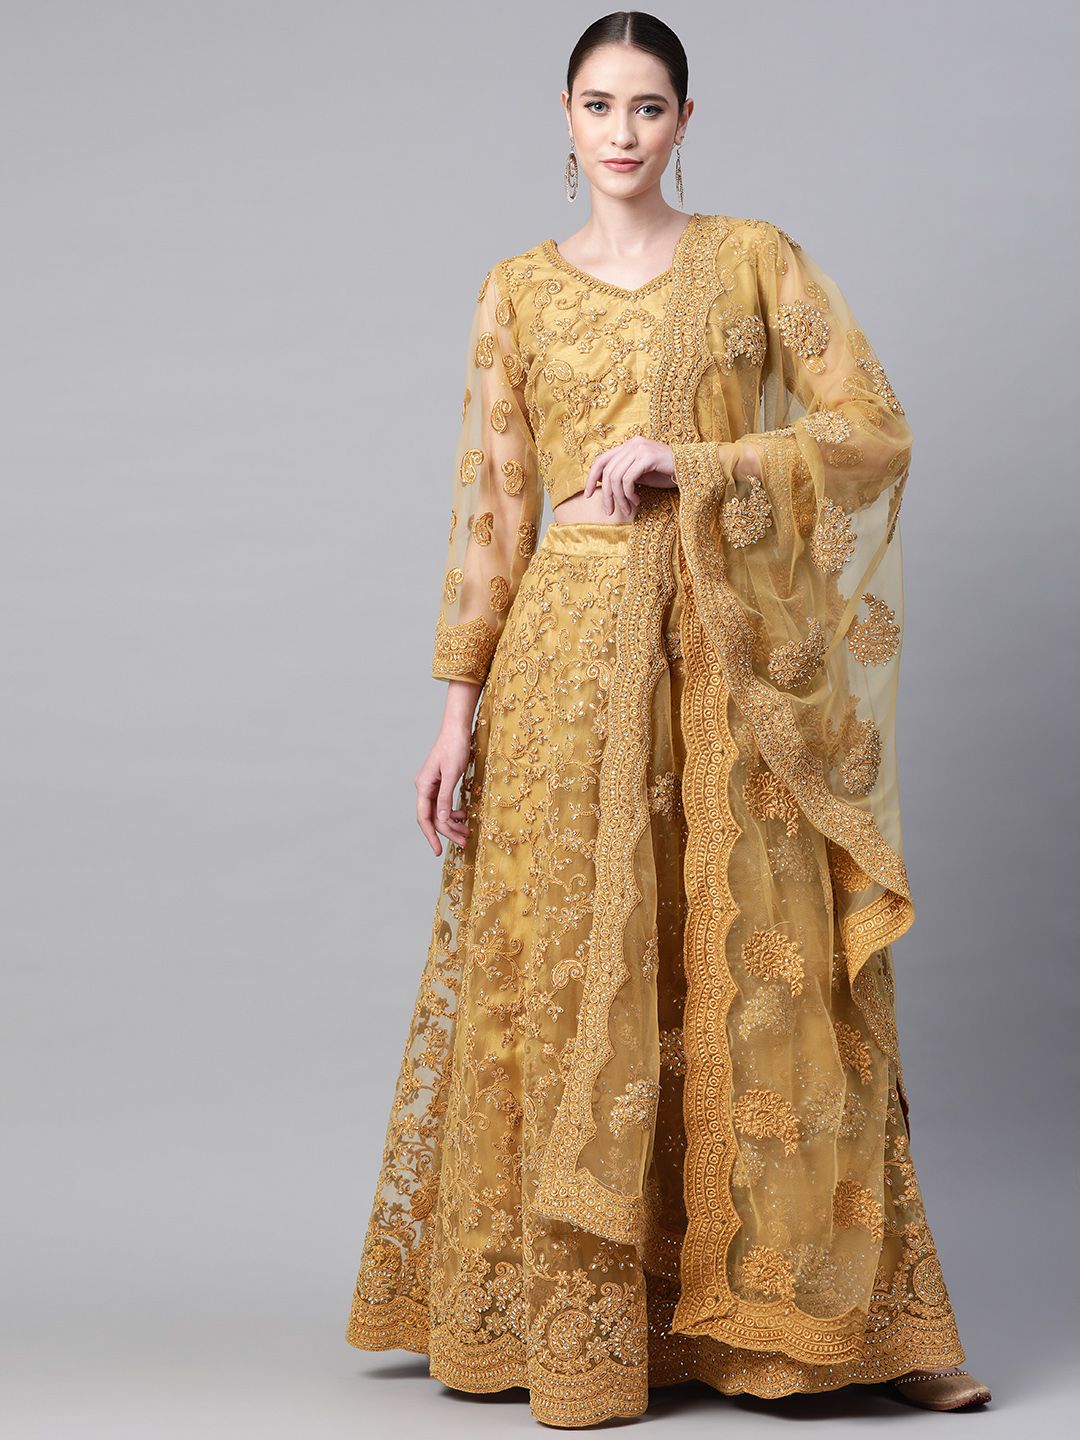 Readiprint Fashions Gold-Toned Embellished Beads and Stones Semi-Stitched Lehenga & Unstitched Blouse With Price in India